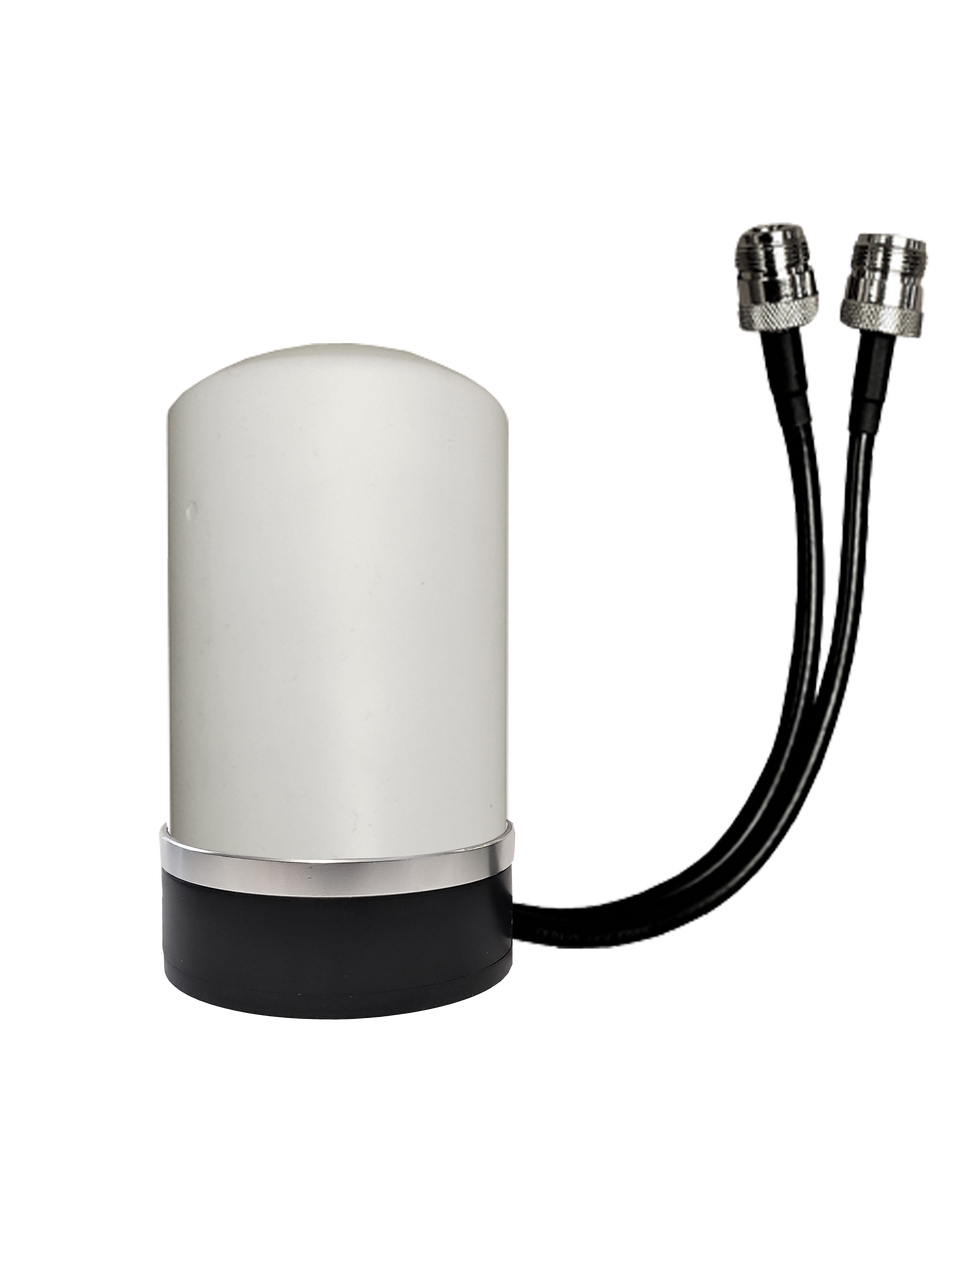 Peplink BR1-Mini - M17M Omni Directional MIMO Cellular 4G 5G LTE AWS XLTE M2M IoT Antenna - Magnetic Base w/1FT N-Female Coax Cables. w/ Cable Length Options